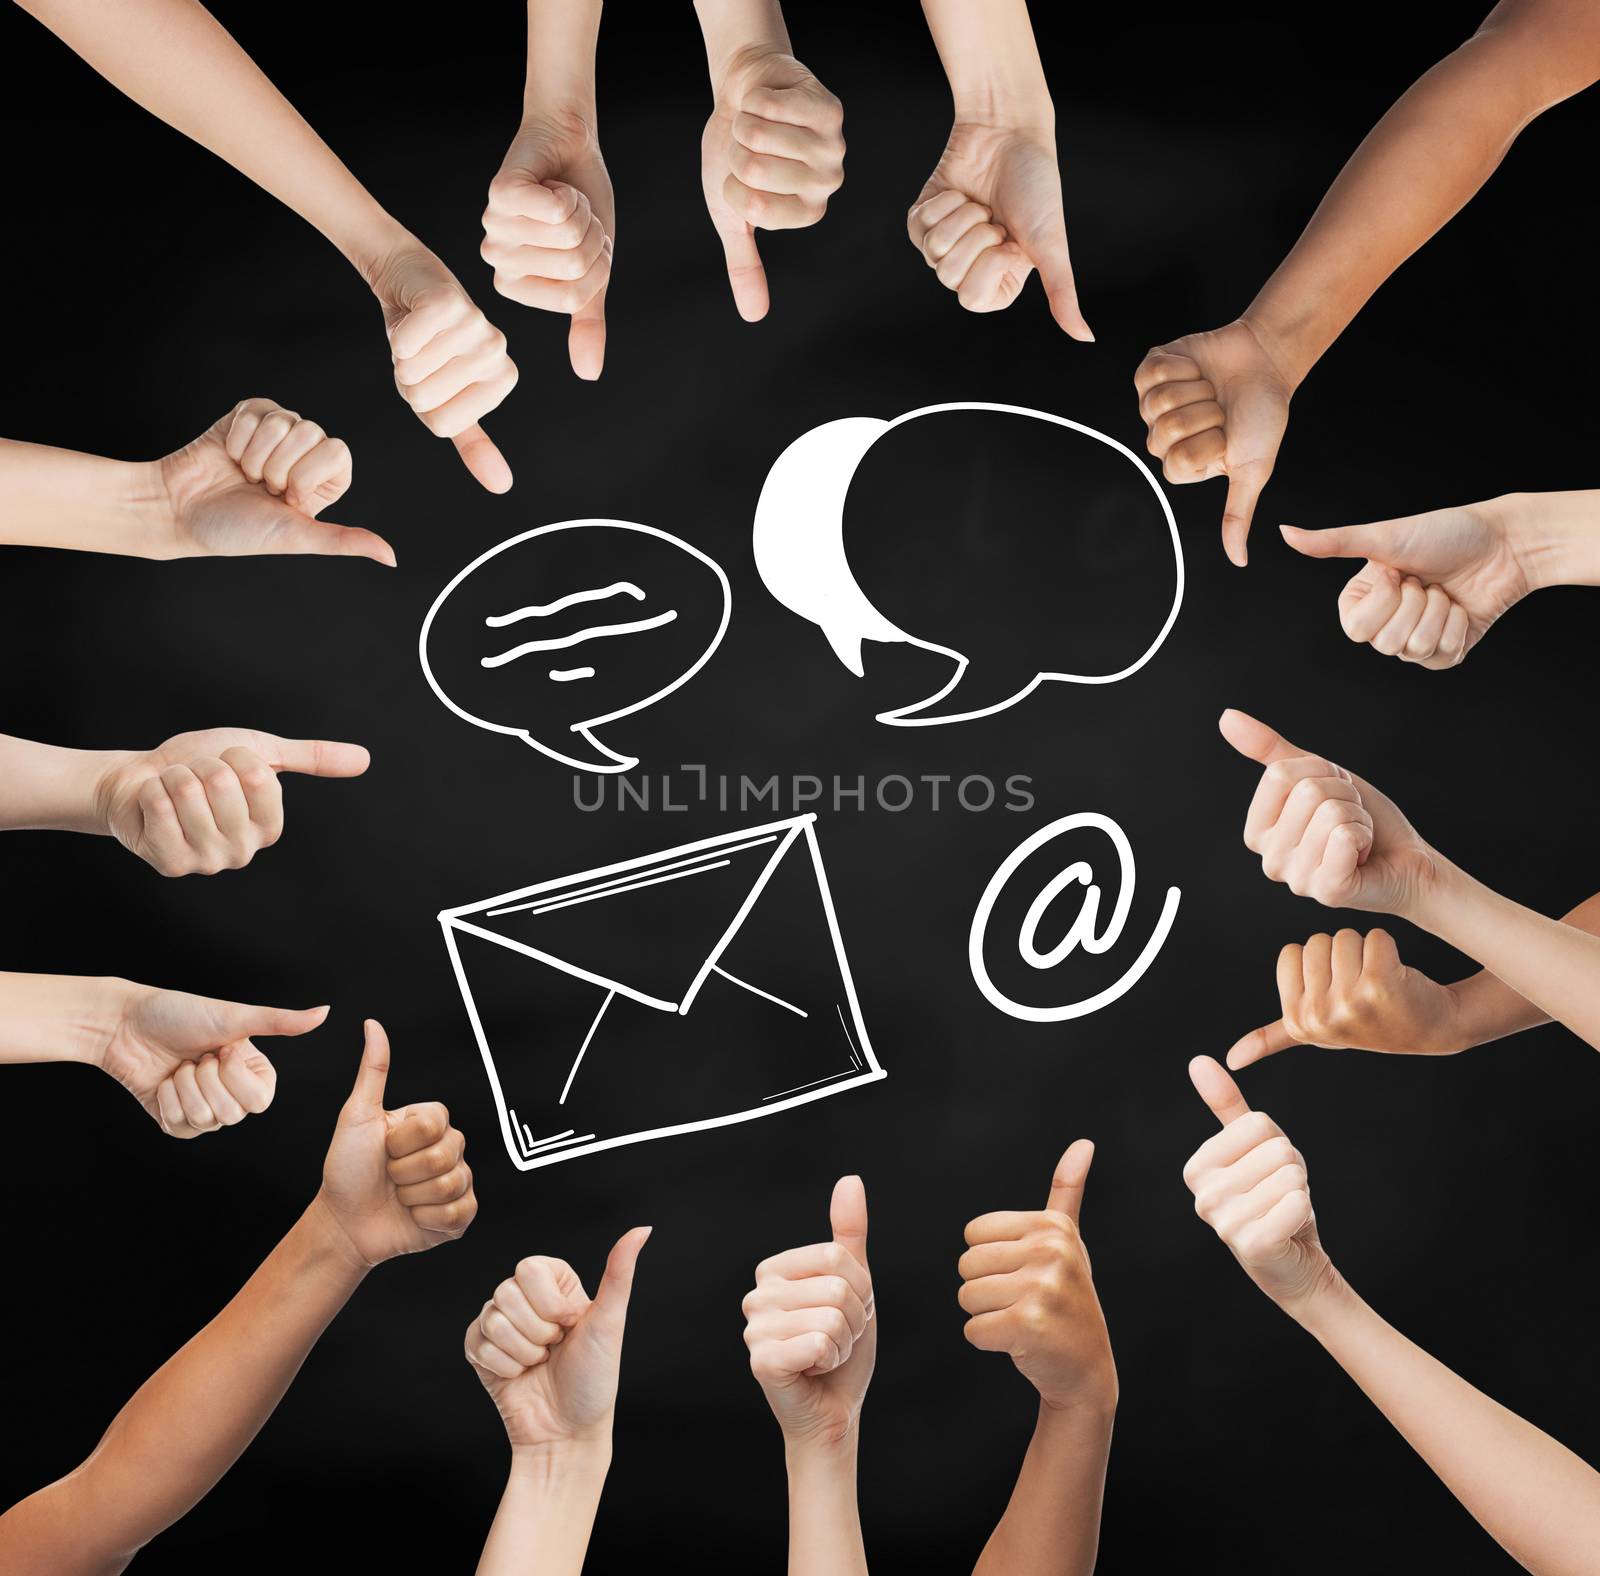 gesture, people, online communication and internet concept - human hands showing thumbs up in circle over black board background with e-mail symbols